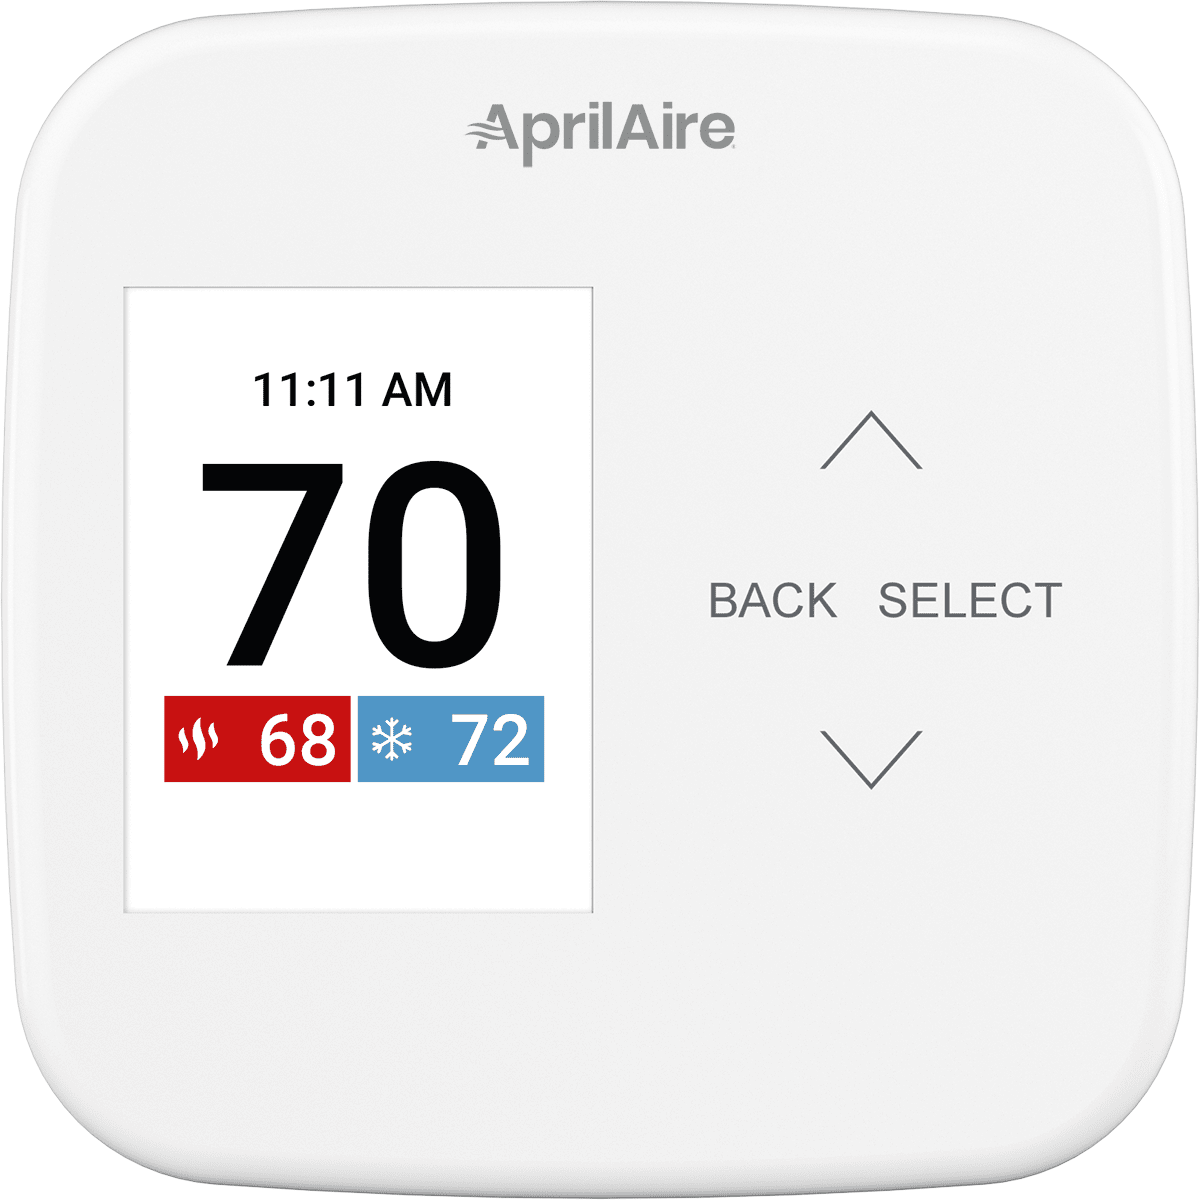 Aprilaire S86WMUPR Programmable Multi-Stage Universal Thermostat W/ IAQ Control - With Wi-Fi